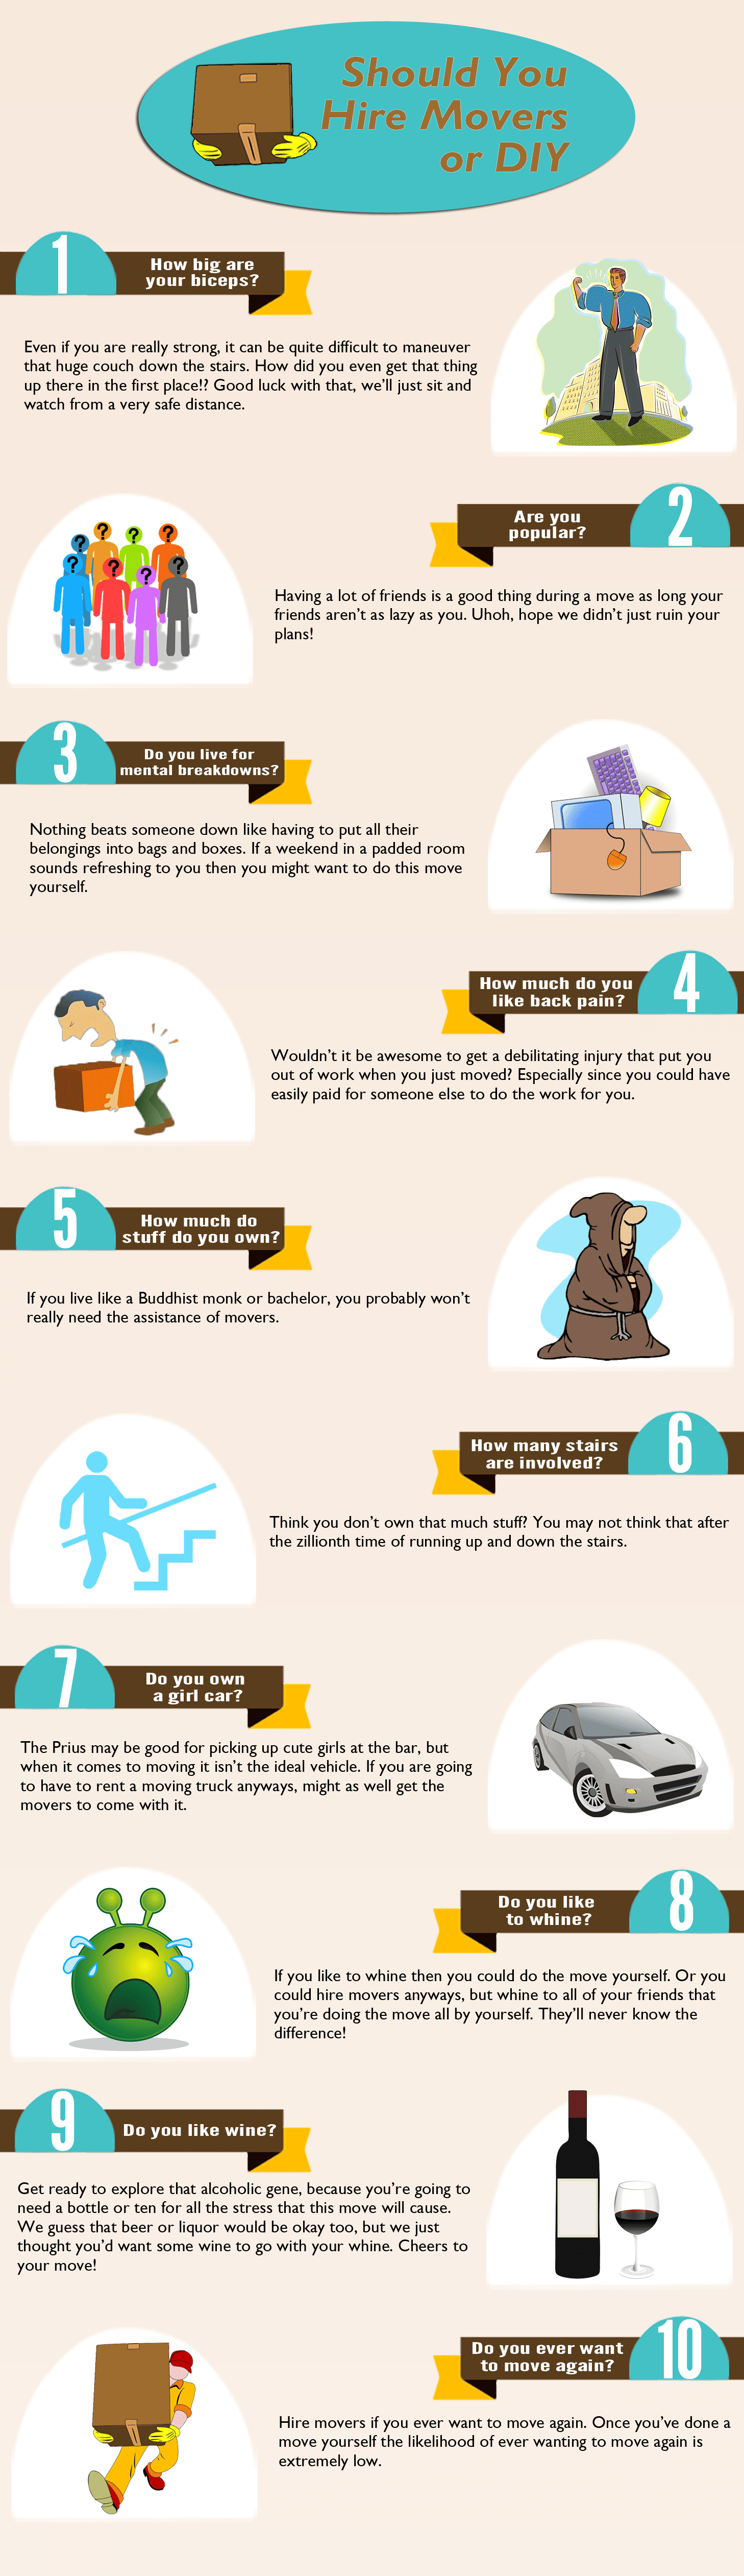 Funny guide on hiring movers vs DIY